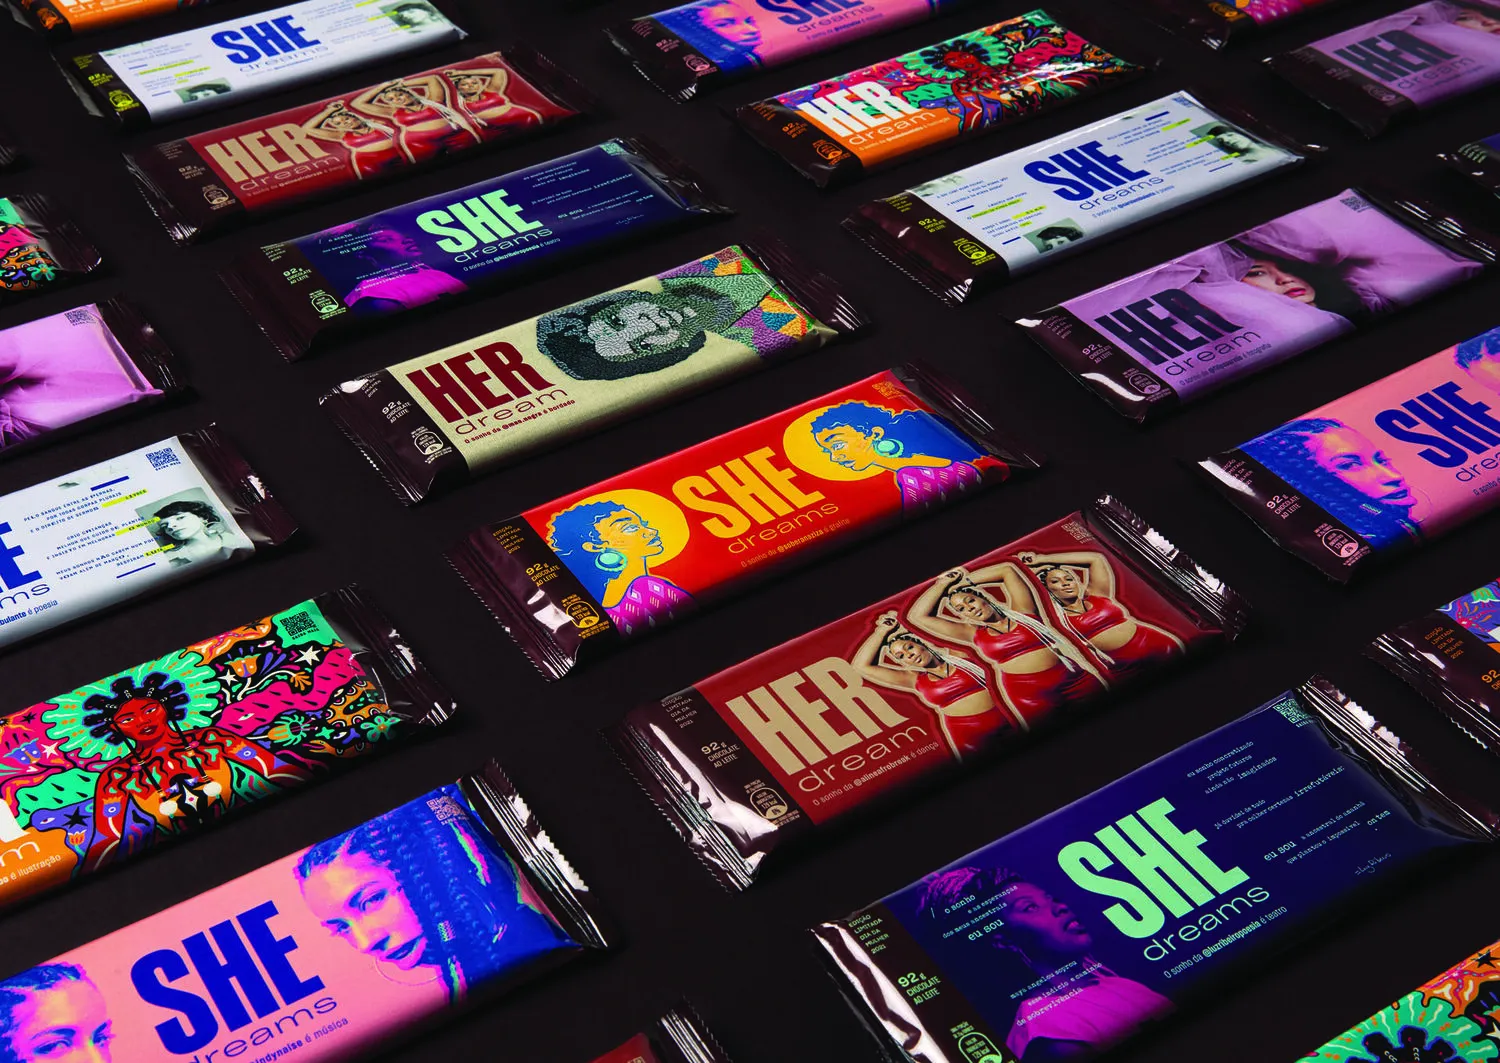 Hershey, HerShe, International Women's Day, campaigns of the world